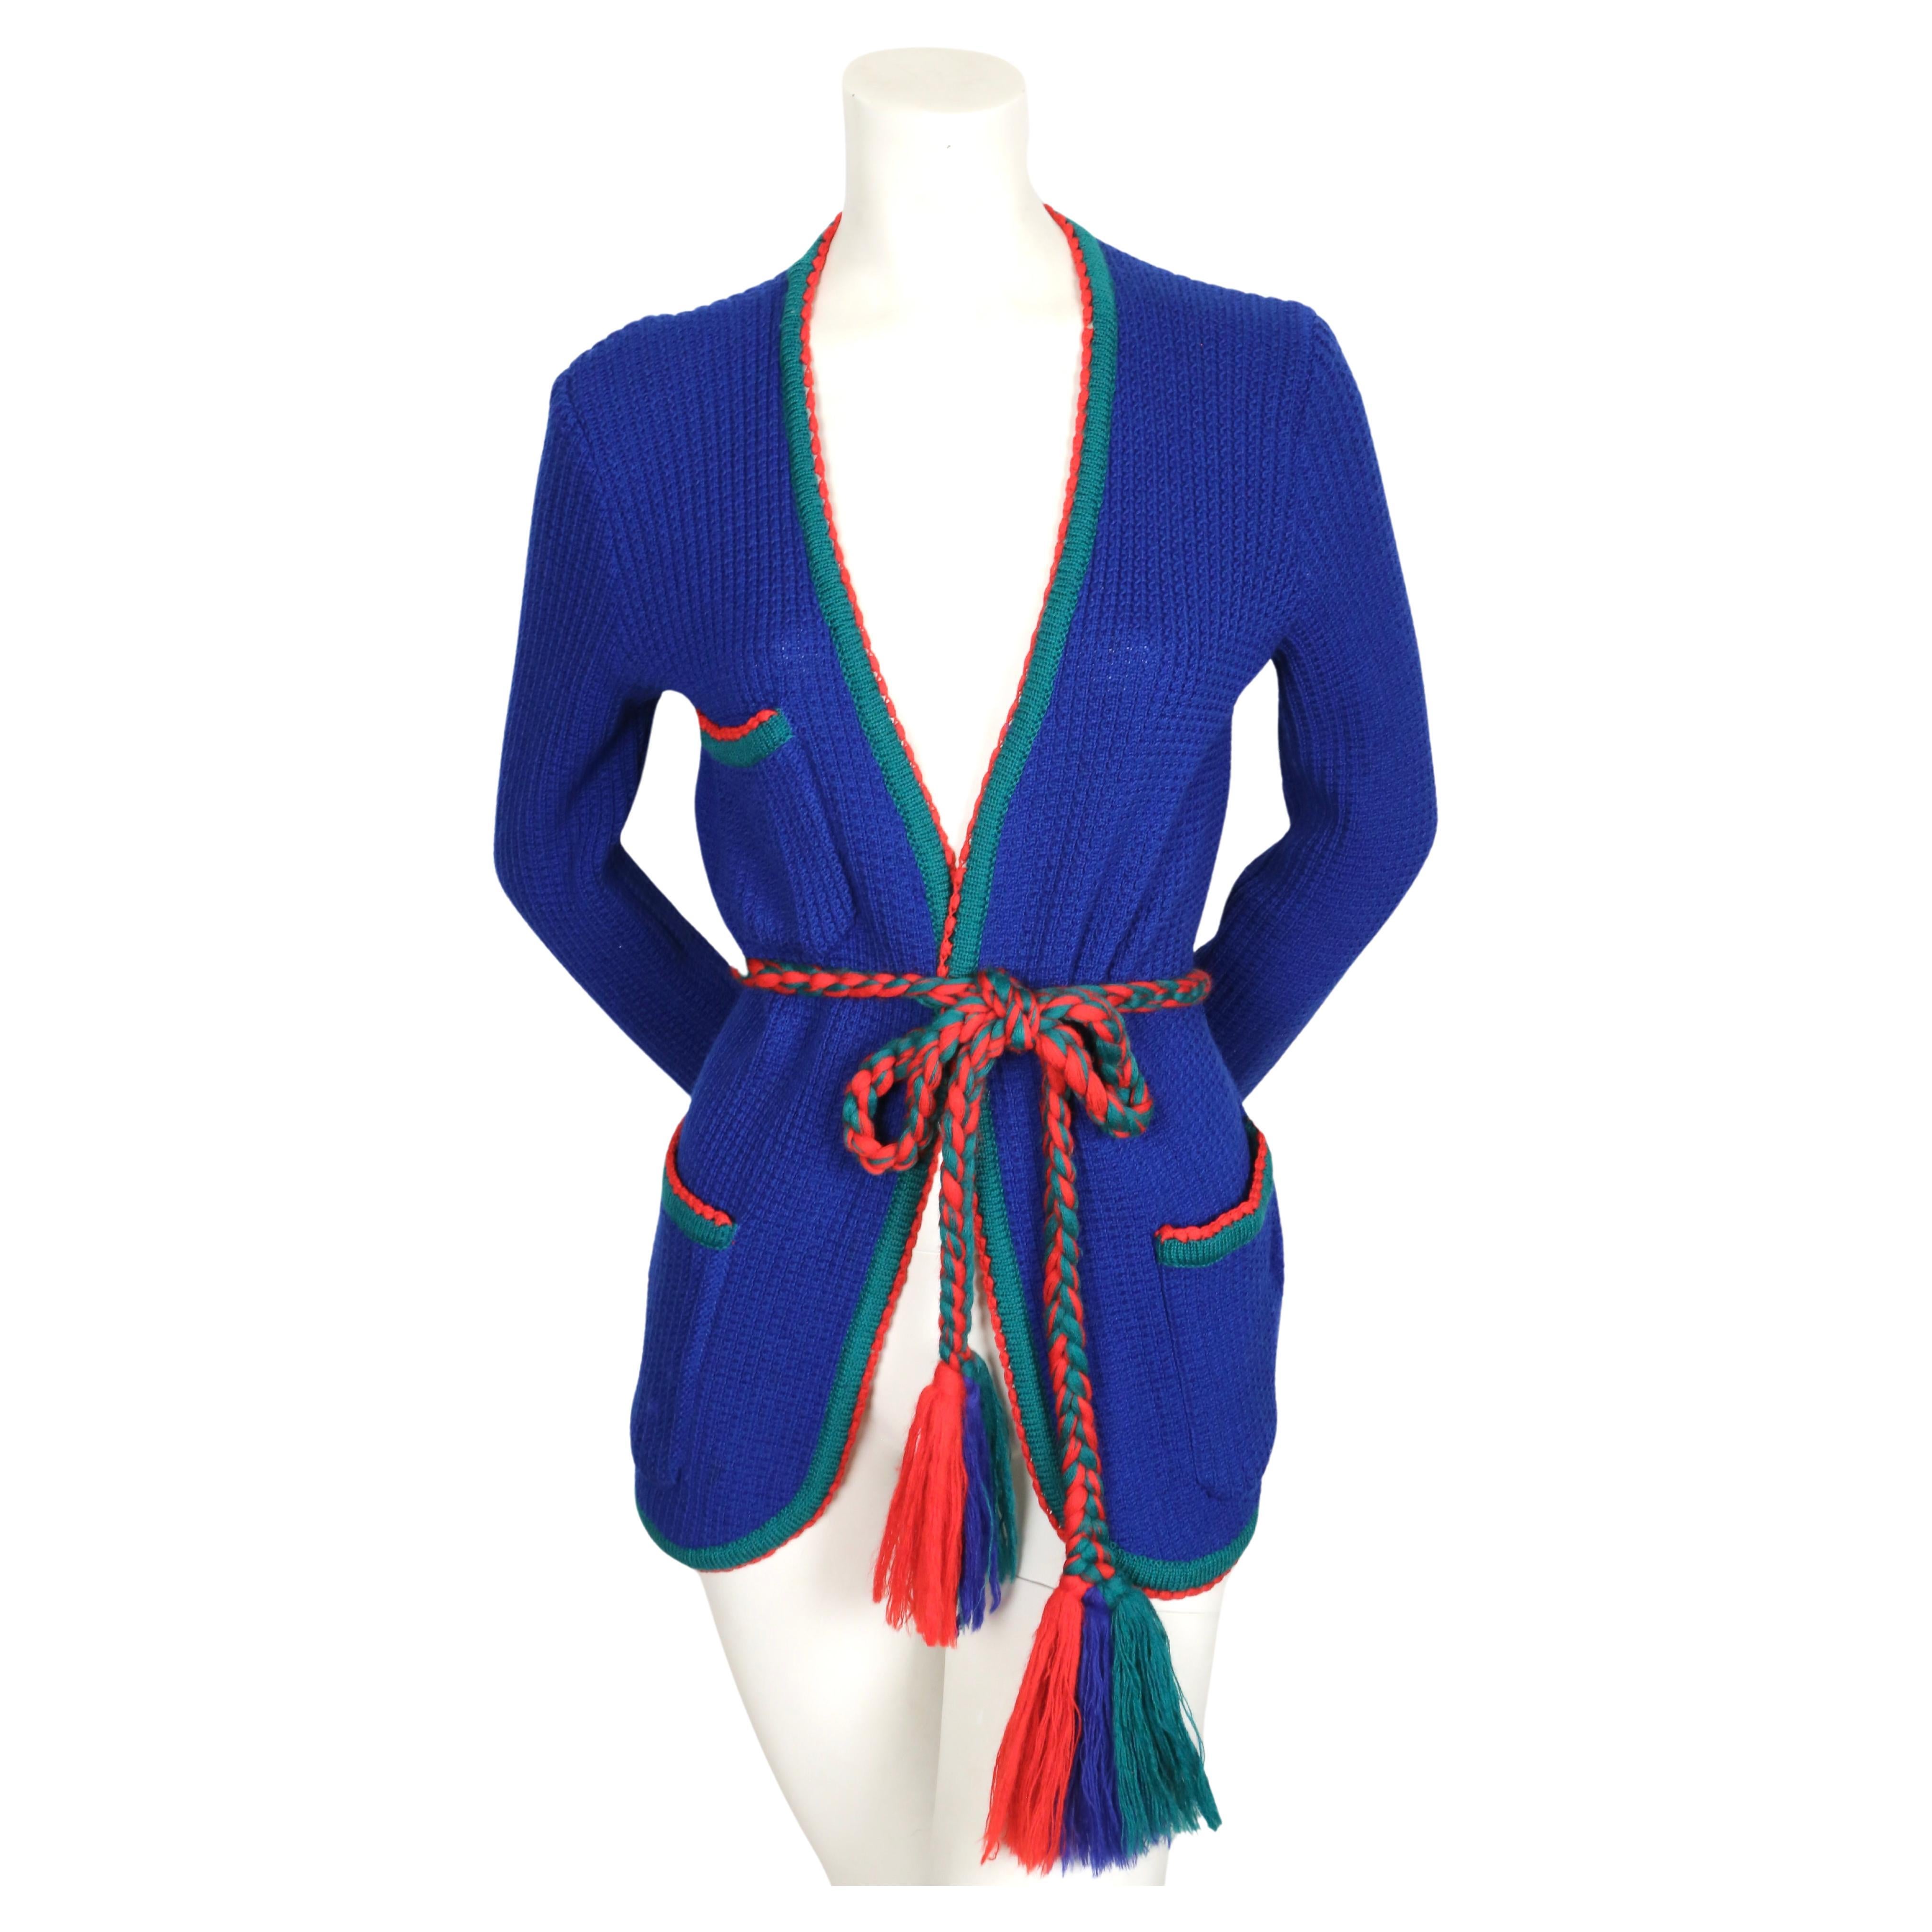 Vivid blue, green and red ribbed cardigan sweater with patch pockets and braided belt designed by Yves Saint Laurent dating to the 1970's. Labeled a size 